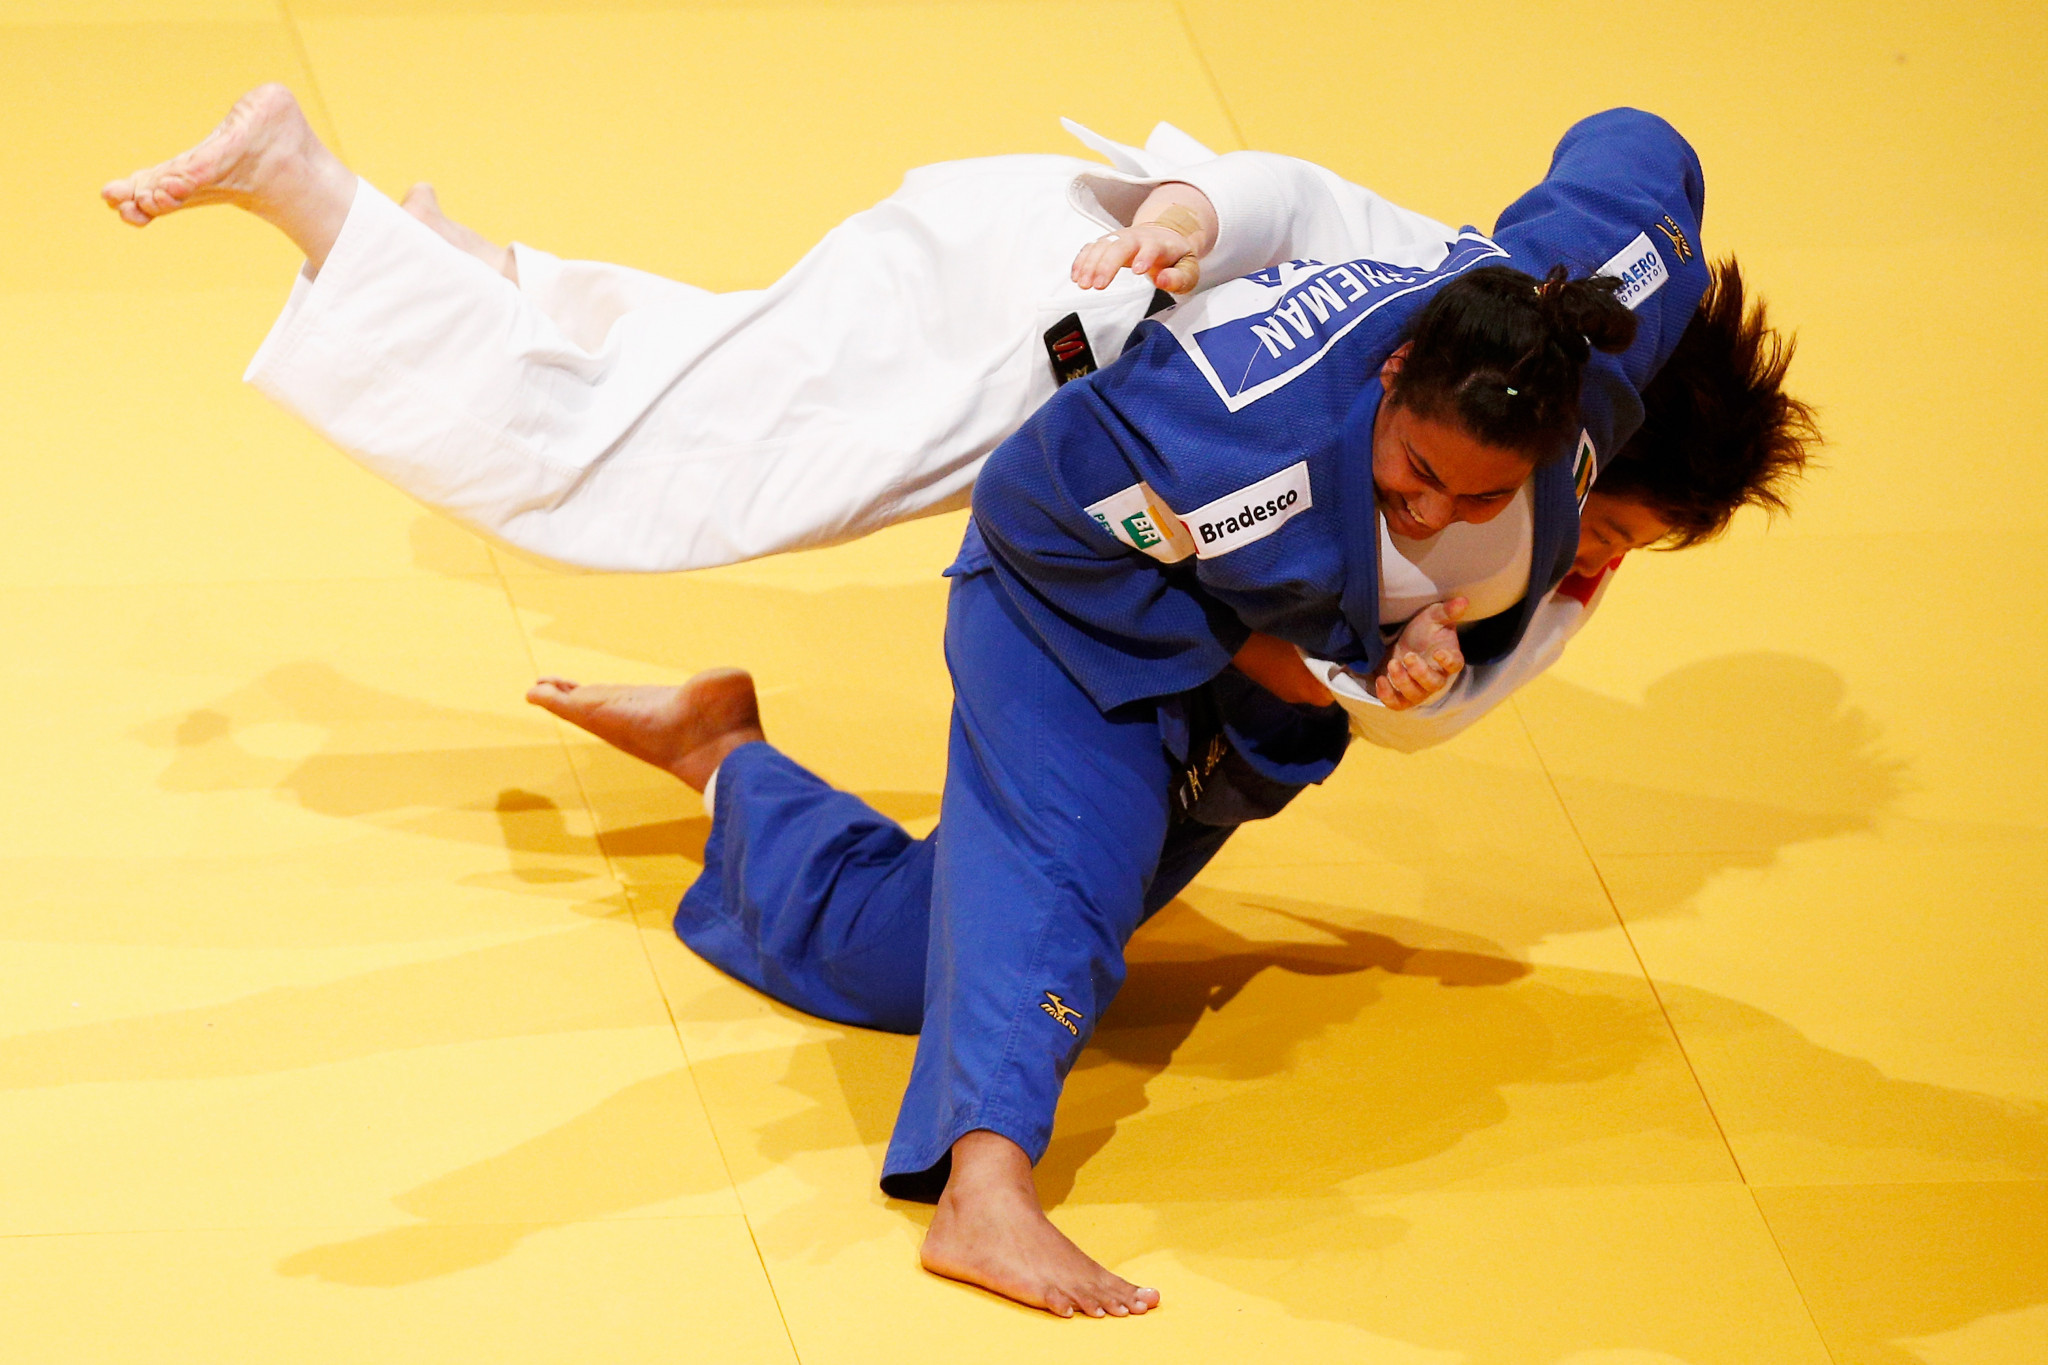 The International Judo Federation has launched an art contest ©Getty Images